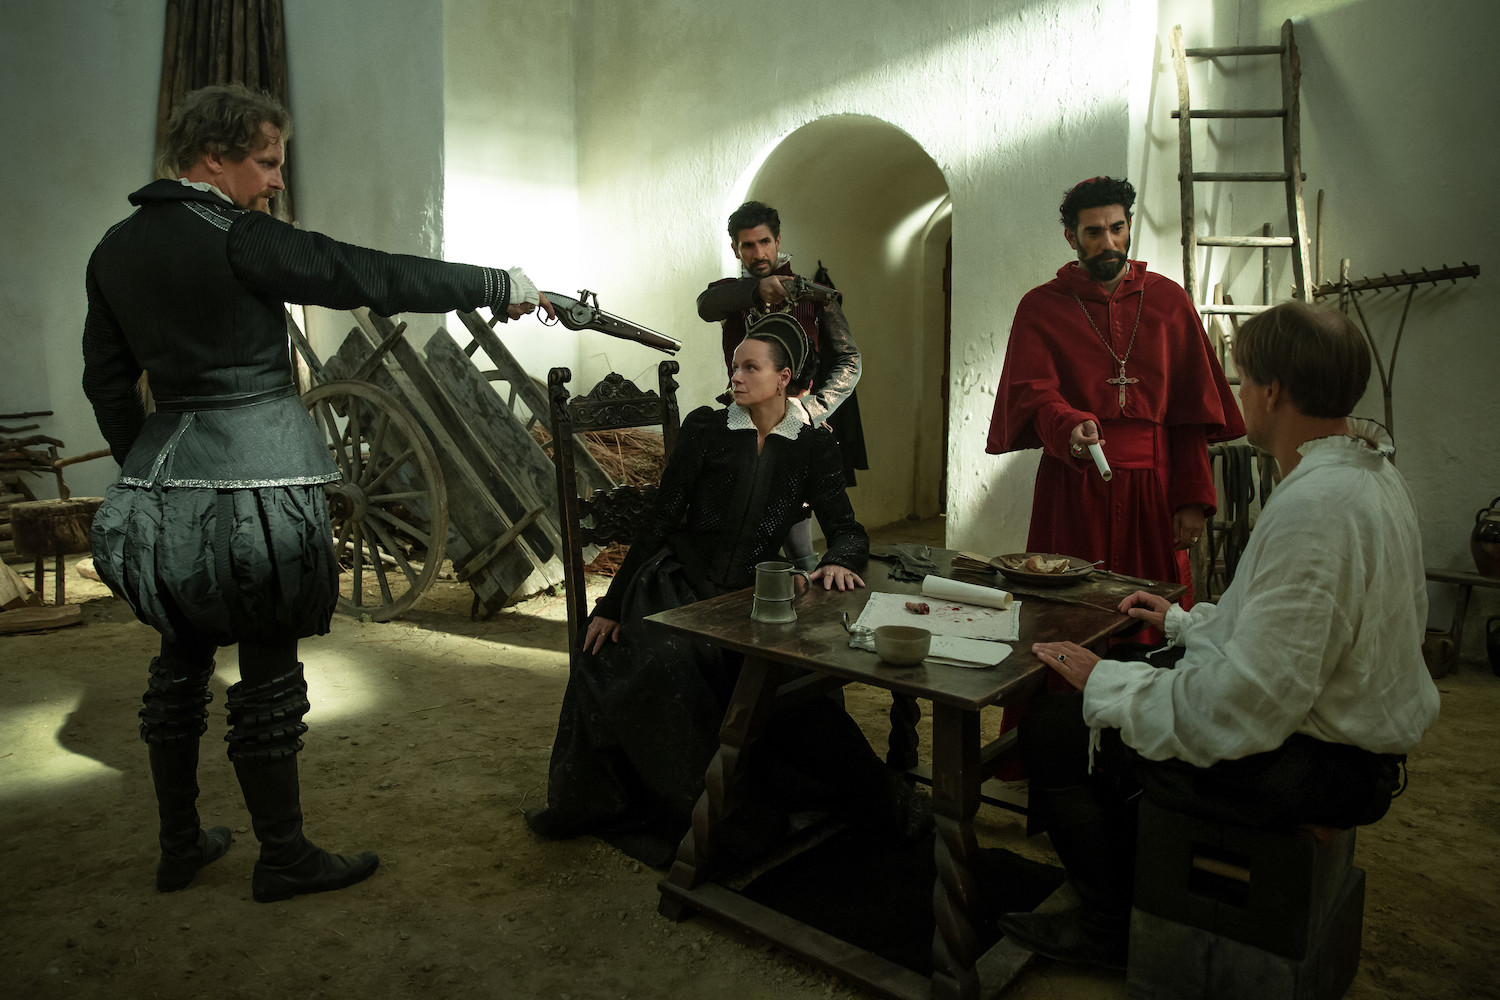 Picture shows: A standoff in a barn. Catherine (Samantha Morton) and Antoine de Bourbon (Nicholas Burns) are seated at a table while Montmorency (Barry Atsma) and Francois de Guise (Raza Jaffrey) threaten them with guns. Charles de Guise (Ray Panthaki) presents Antoine with the document they want him to sign which will eliminate his claim to the Regency.